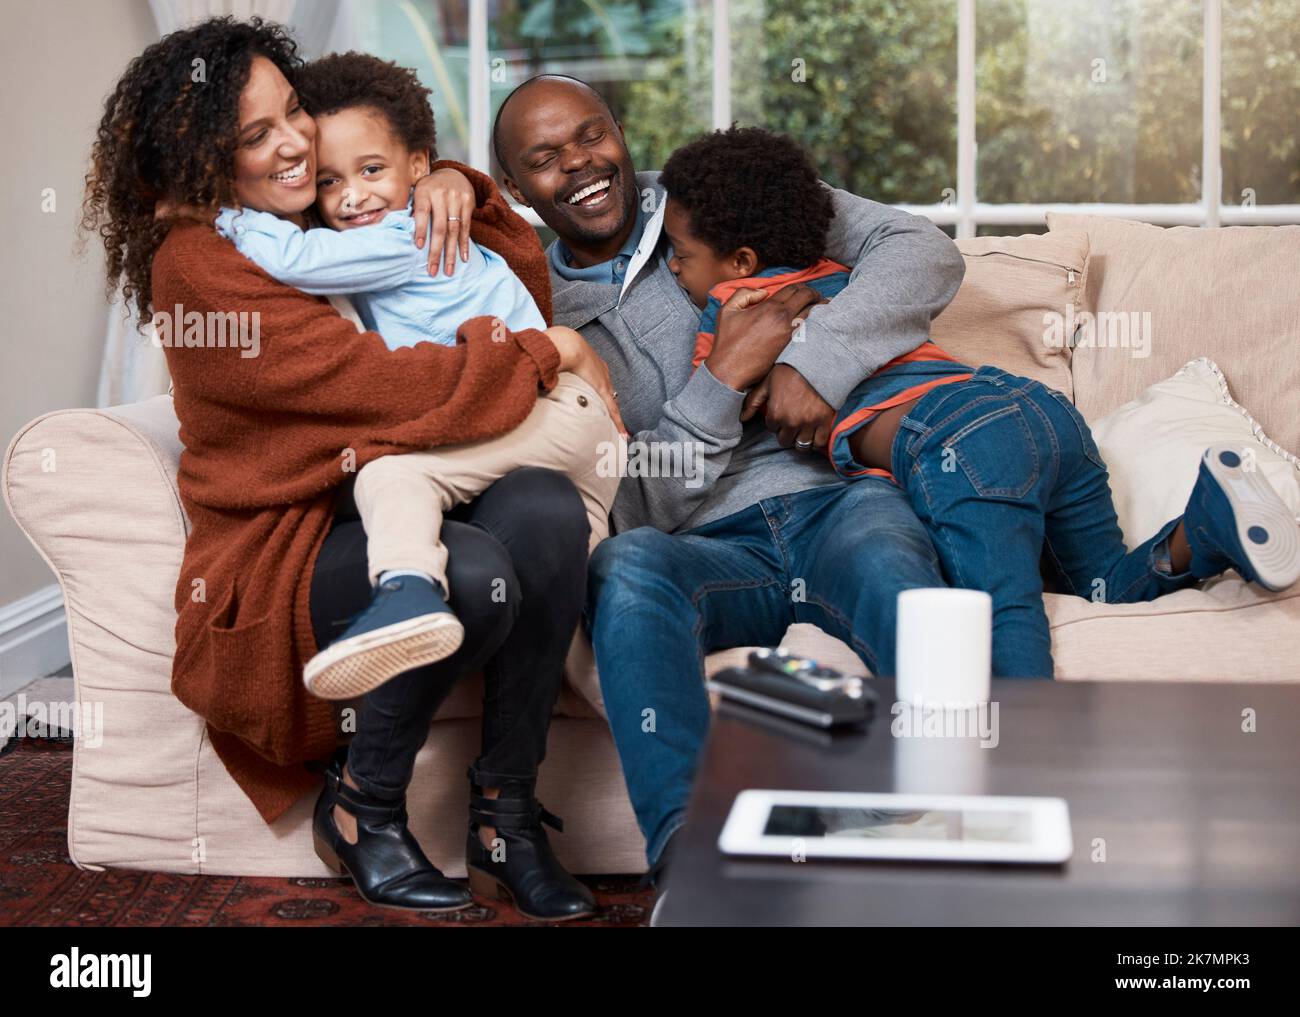 Big hugs for all. a happy family relaxing on a sofa at home. Stock Photo